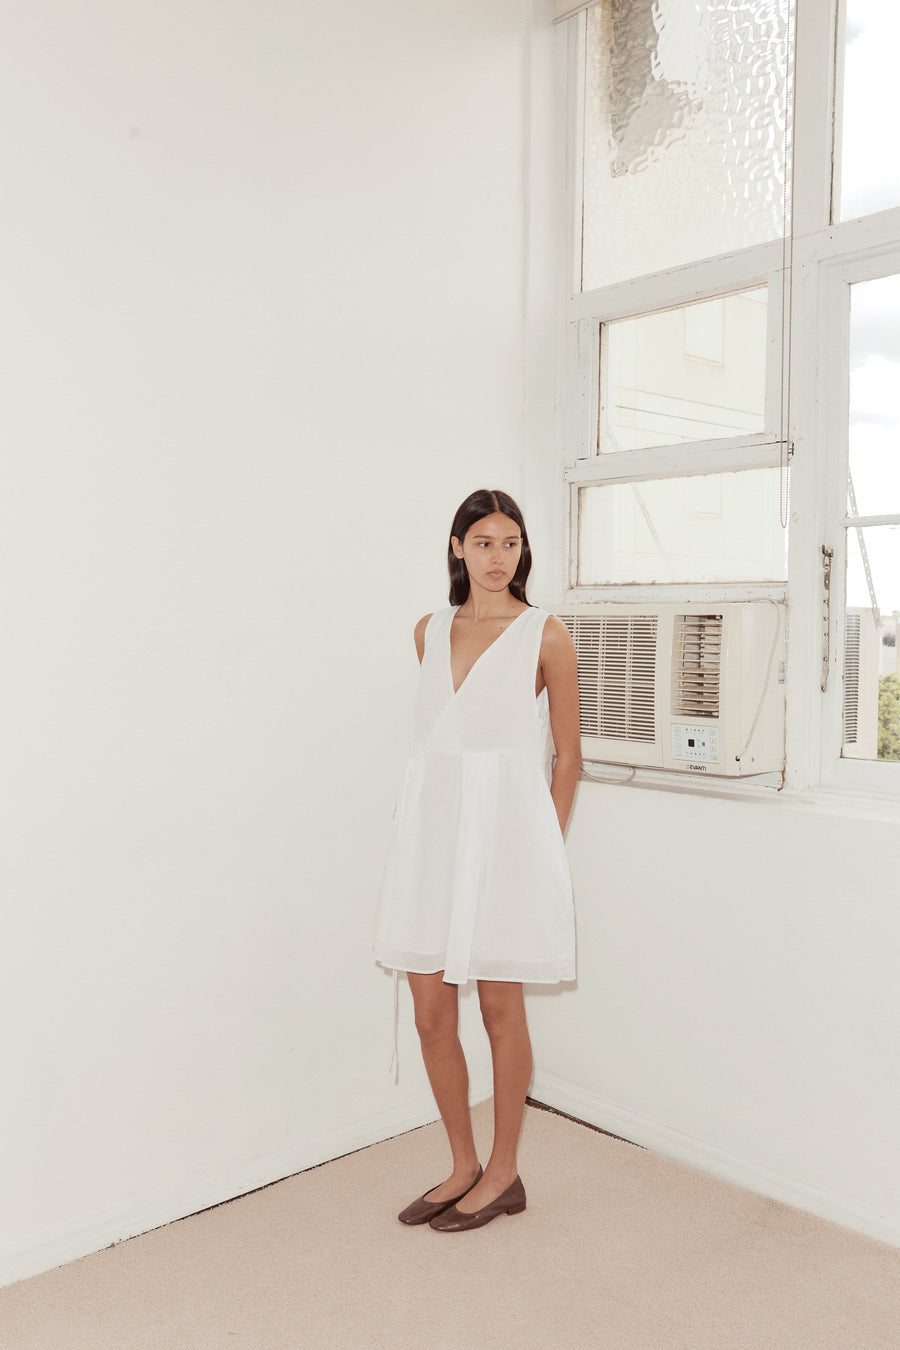 Long shot of female model standing against a white wall with a vintage airconditioning unit and dappled window wearing the Wrap Tie Dress in white by Deiji Studios. A relaxed airy mini dress with cross front v neckline, waist tie and double lined skirt.